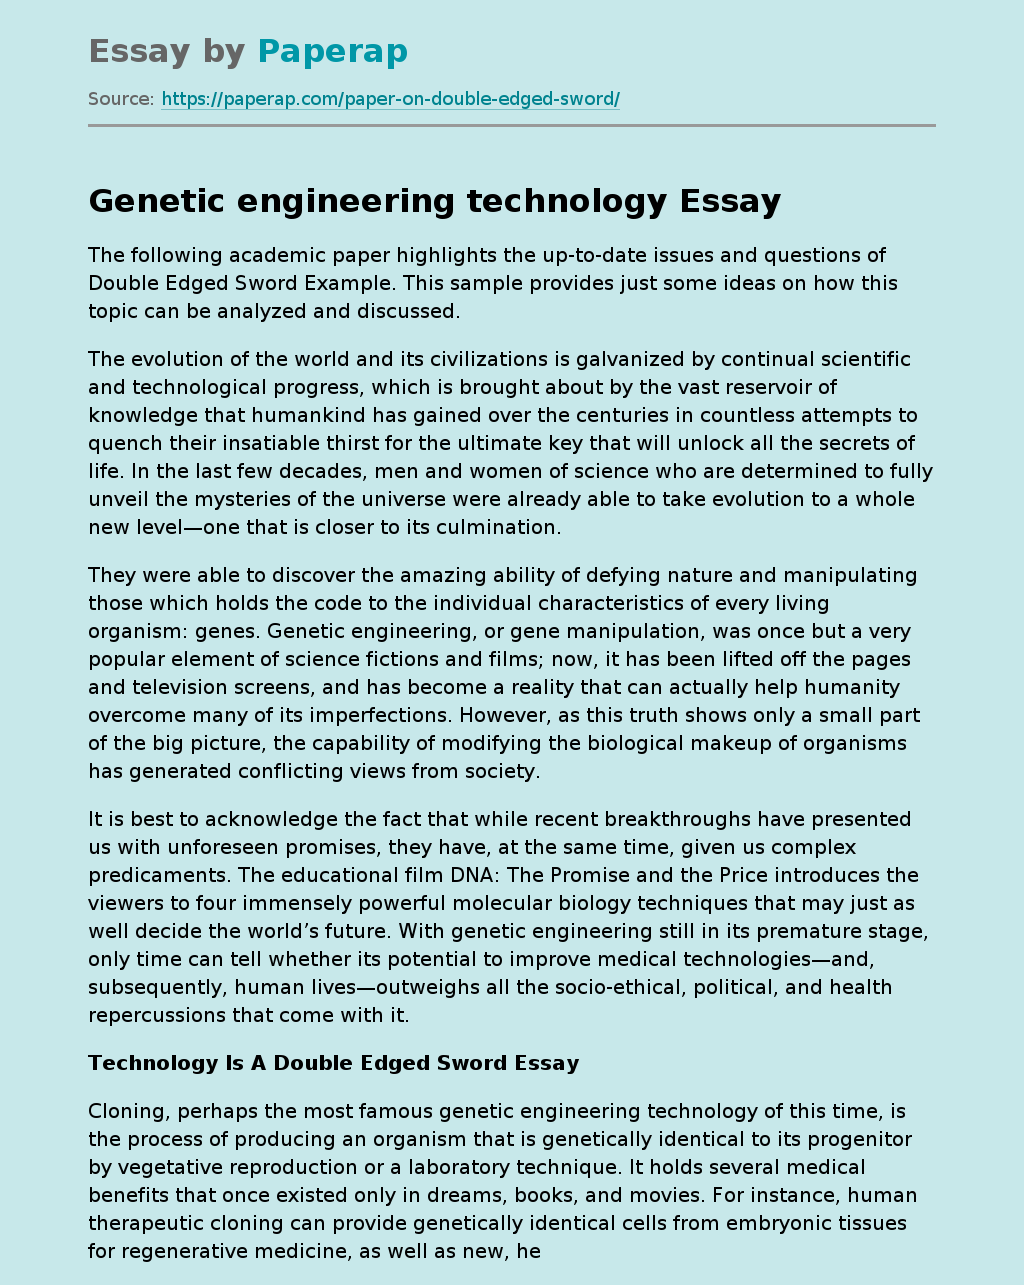 The Genetic Engineering Technology